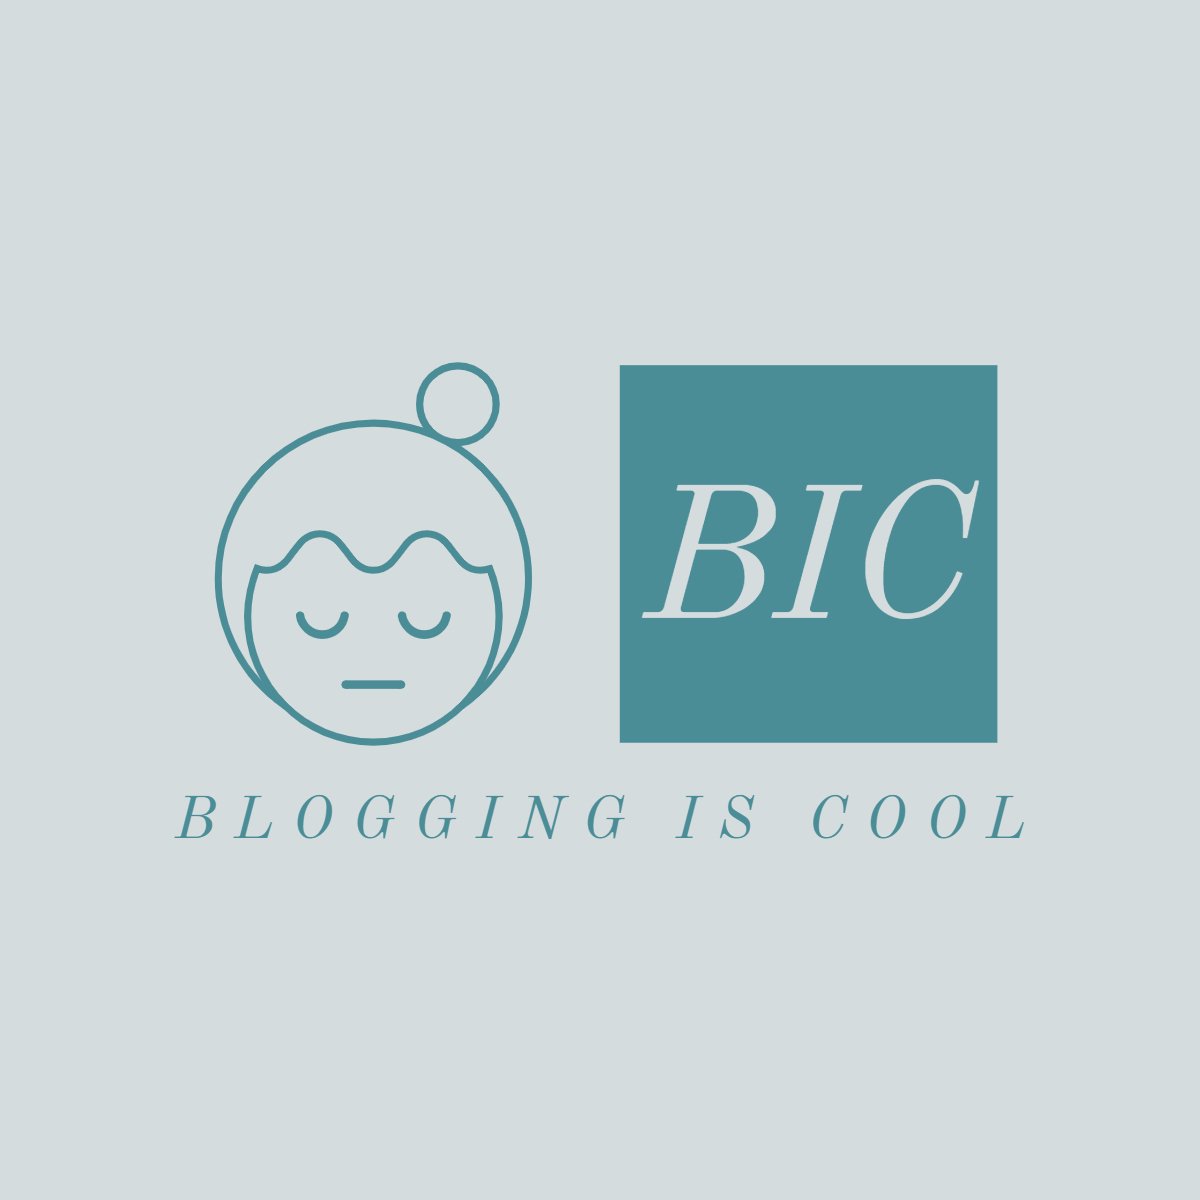 Bloggingiscool.com Dealing with Spam Comments on Your Blog